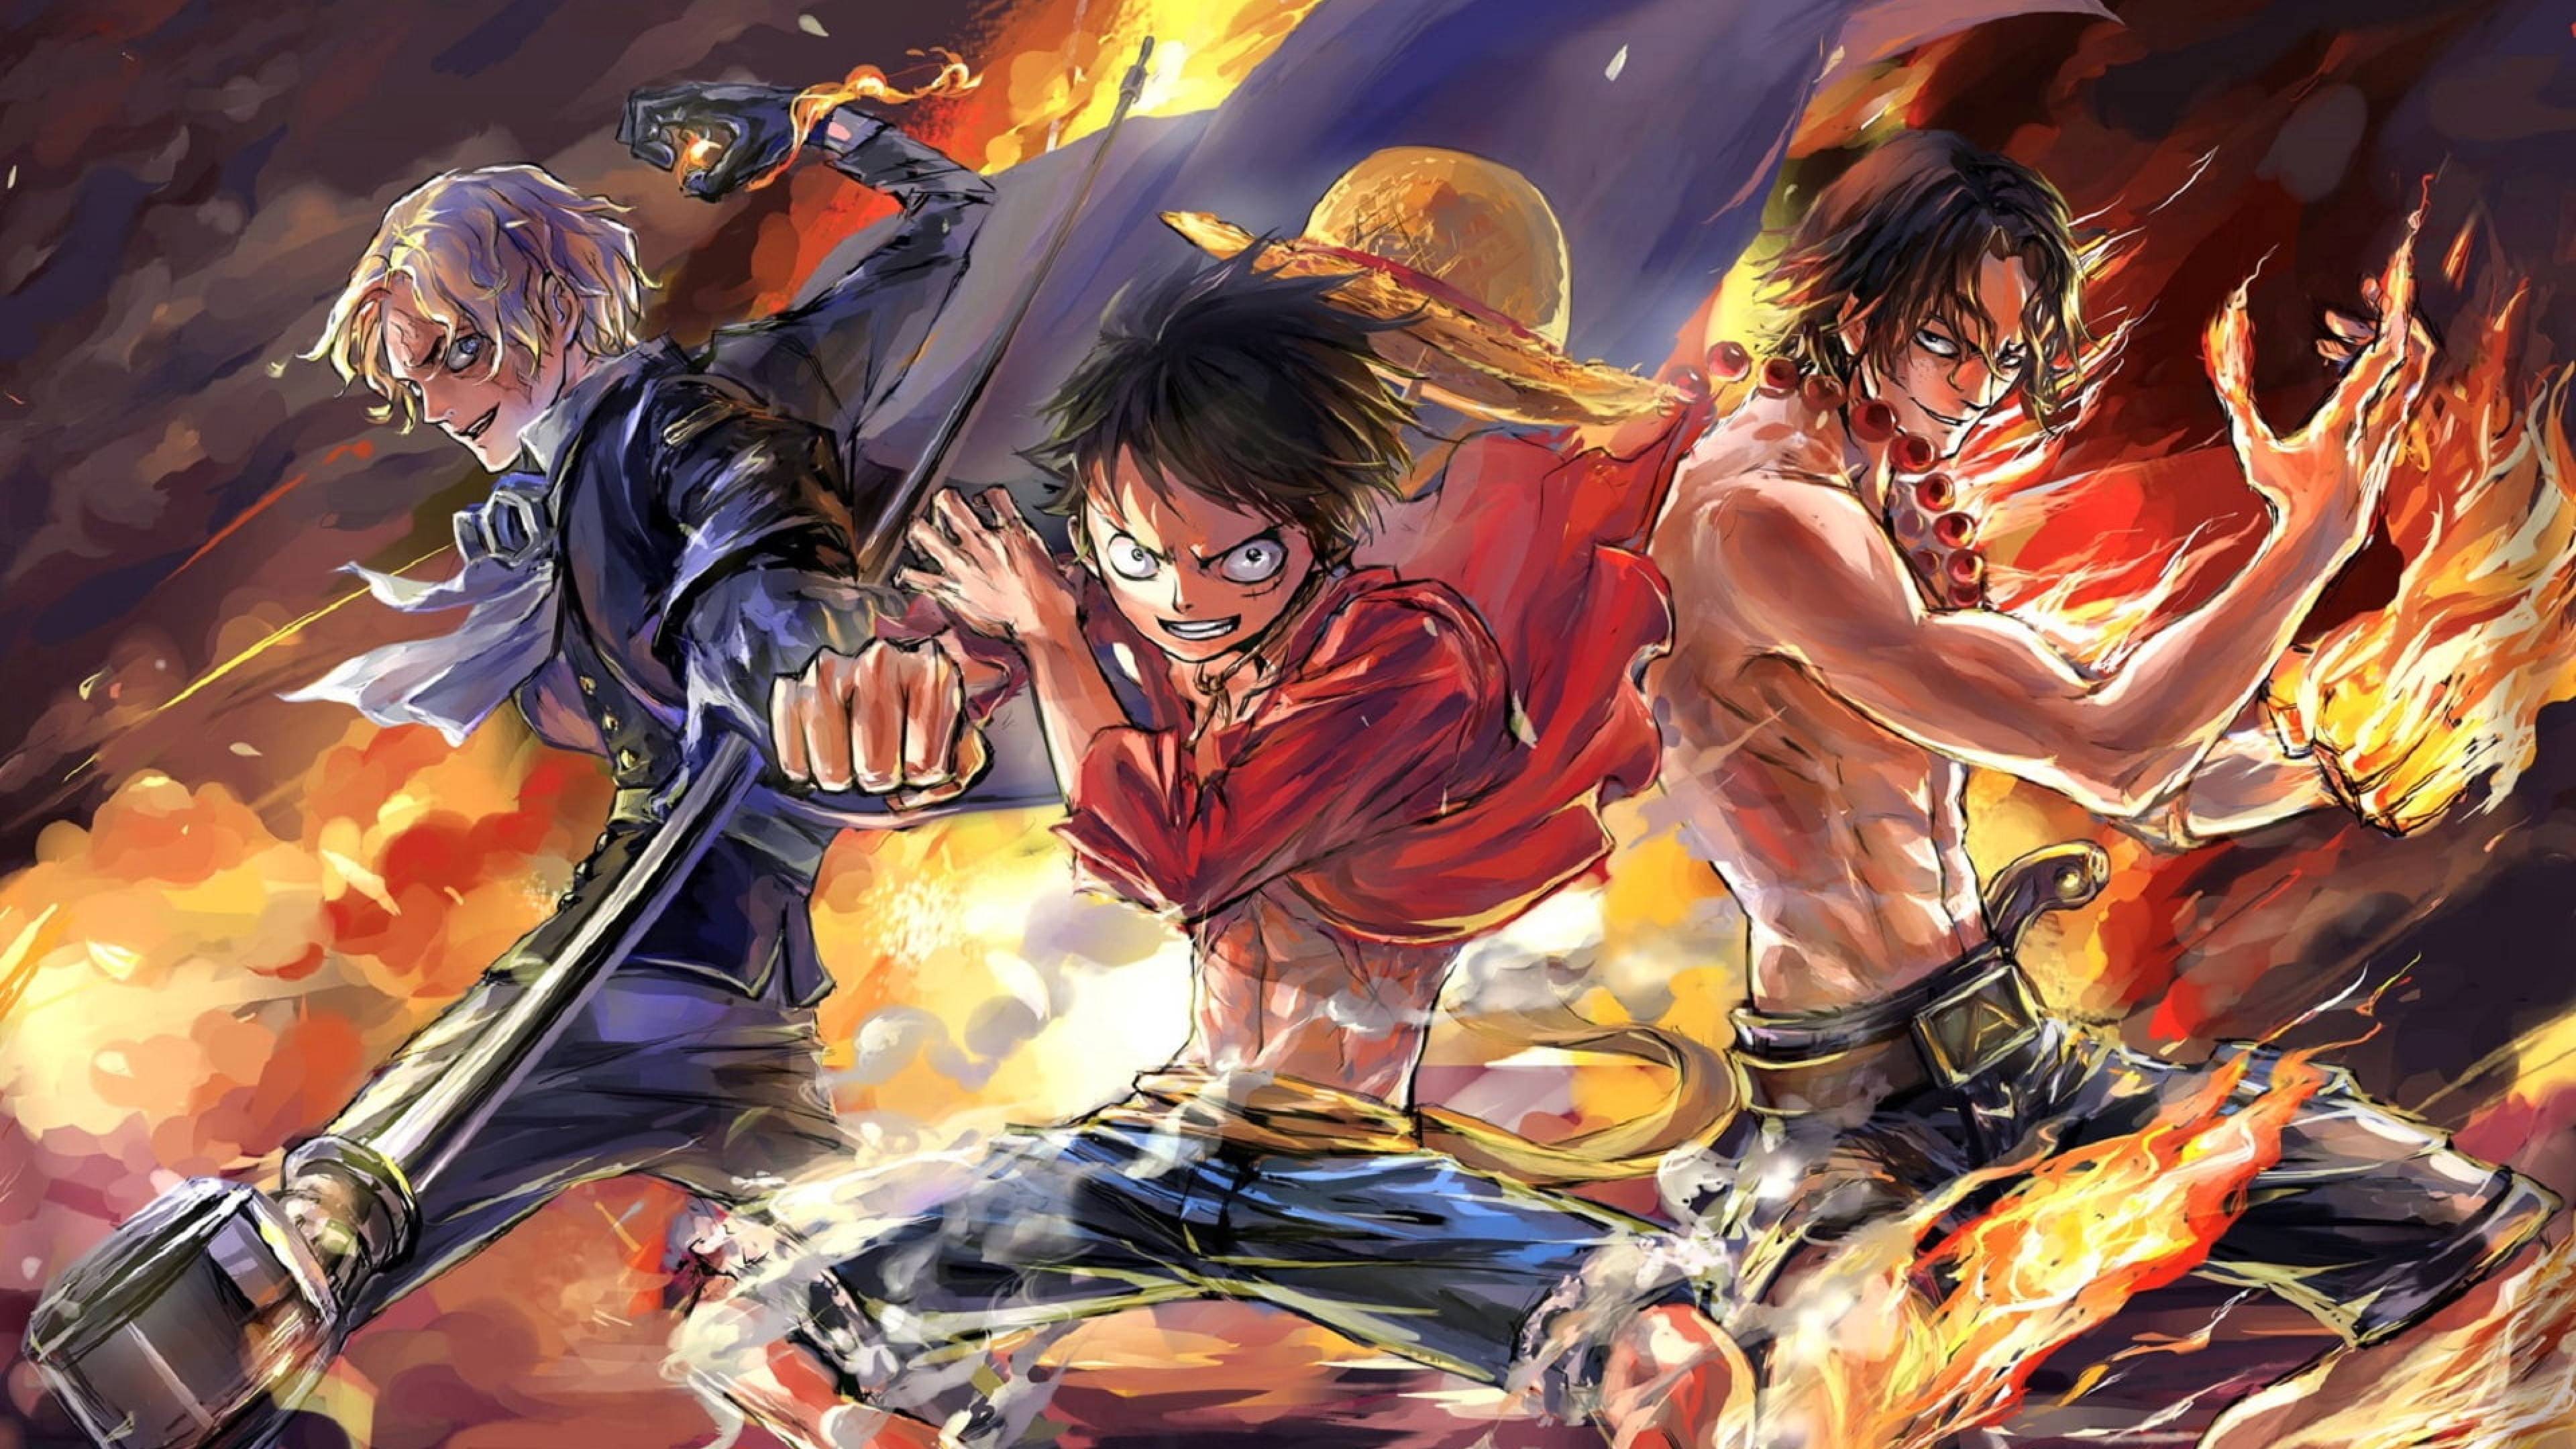 3840x2160 Luffy Ace And Sabo One Piece Team 4k Wallpaper Hd Anime 4k Wallpapers Images Photos And Background